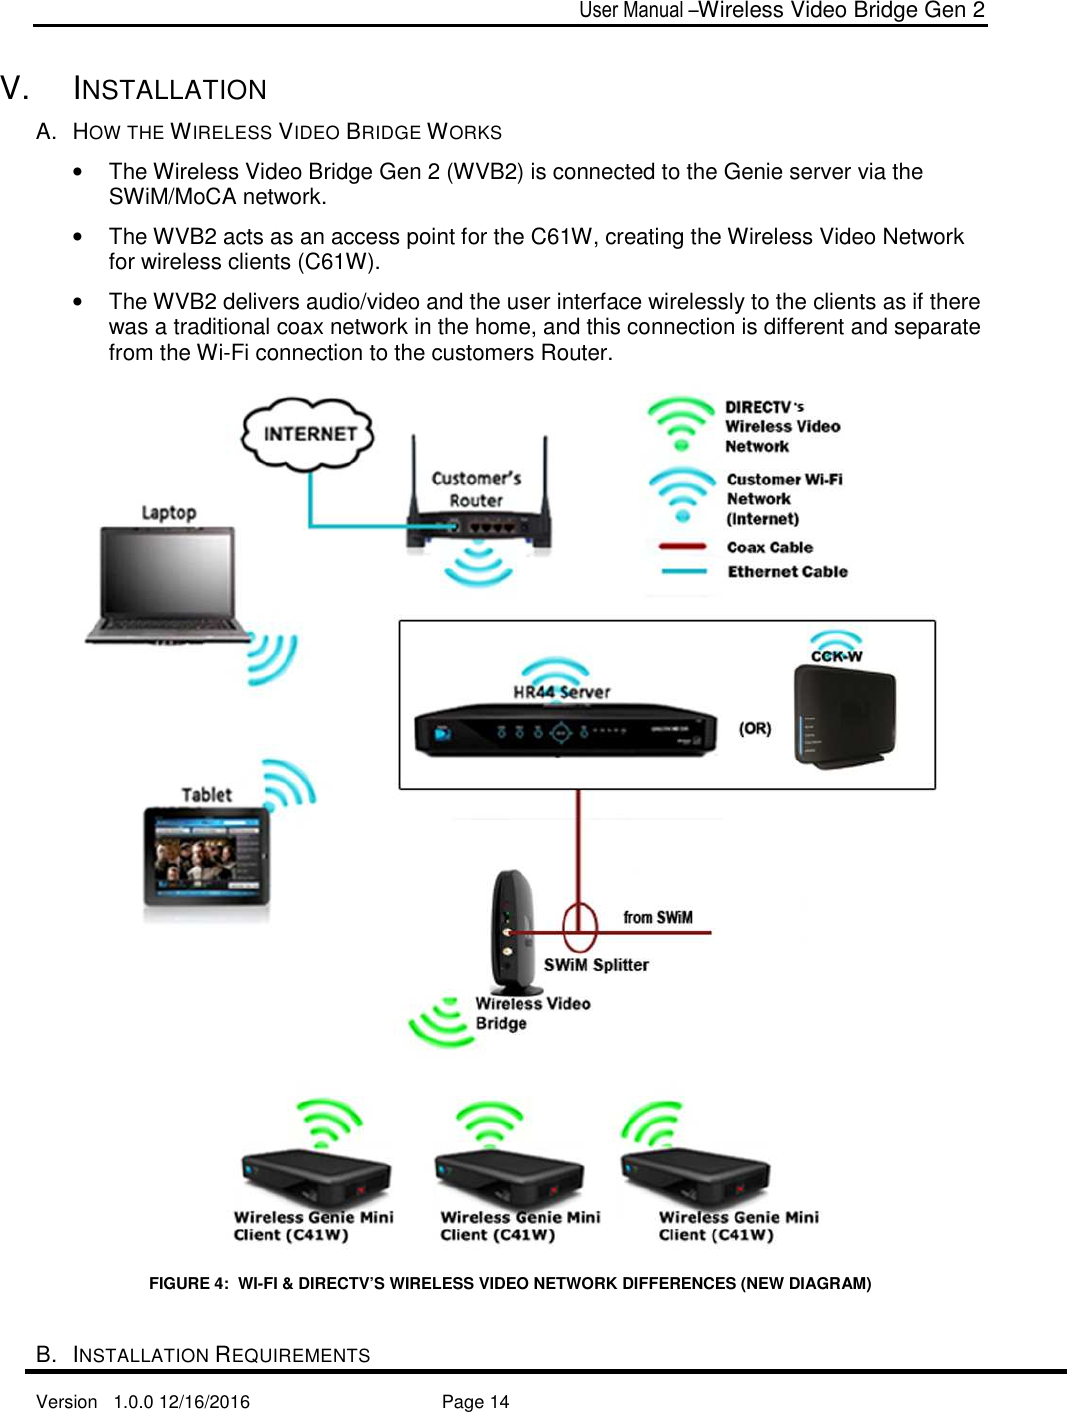  User Manual –Wireless Video Bridge Gen 2  Version   1.0.0 12/16/2016     Page 14   V.  INSTALLATION A.  HOW THE WIRELESS VIDEO BRIDGE WORKS •  The Wireless Video Bridge Gen 2 (WVB2) is connected to the Genie server via the SWiM/MoCA network.   •  The WVB2 acts as an access point for the C61W, creating the Wireless Video Network for wireless clients (C61W).  •  The WVB2 delivers audio/video and the user interface wirelessly to the clients as if there was a traditional coax network in the home, and this connection is different and separate from the Wi-Fi connection to the customers Router.  FIGURE 4:  WI-FI &amp; DIRECTV’S WIRELESS VIDEO NETWORK DIFFERENCES (NEW DIAGRAM) B.  INSTALLATION REQUIREMENTS 